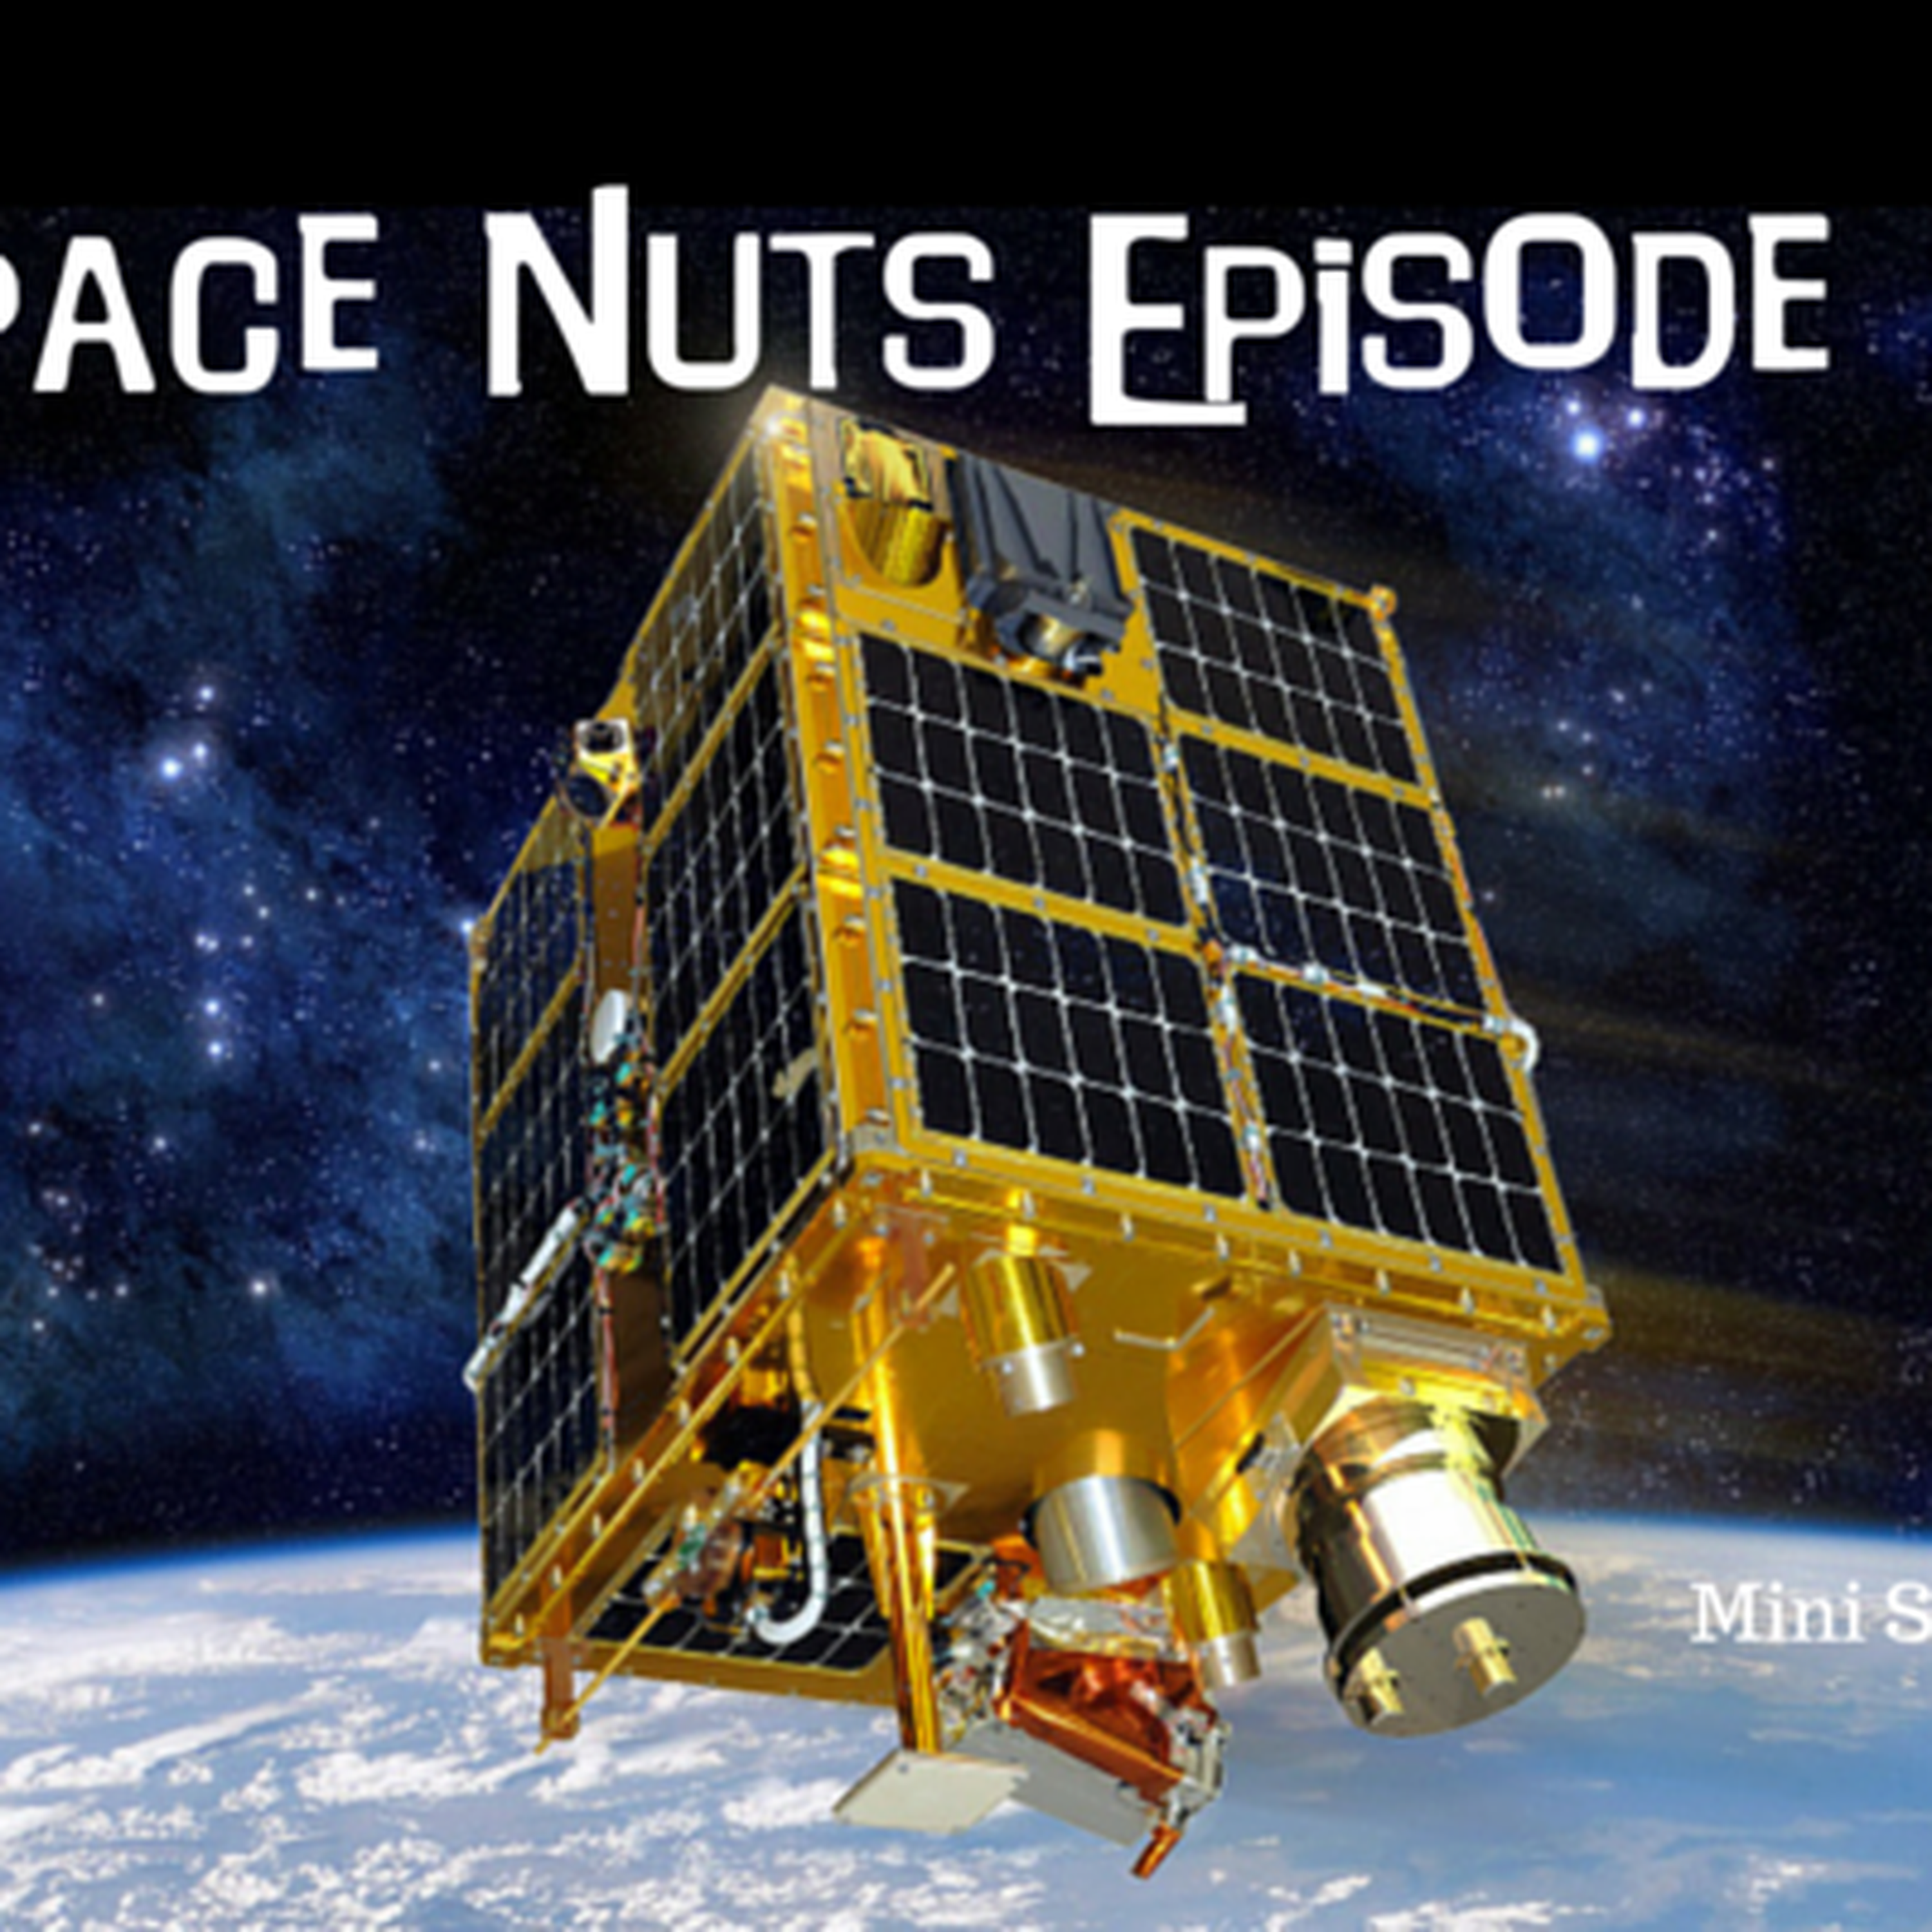 24: Space Nuts Episode 23 - More gravitational waves discovered